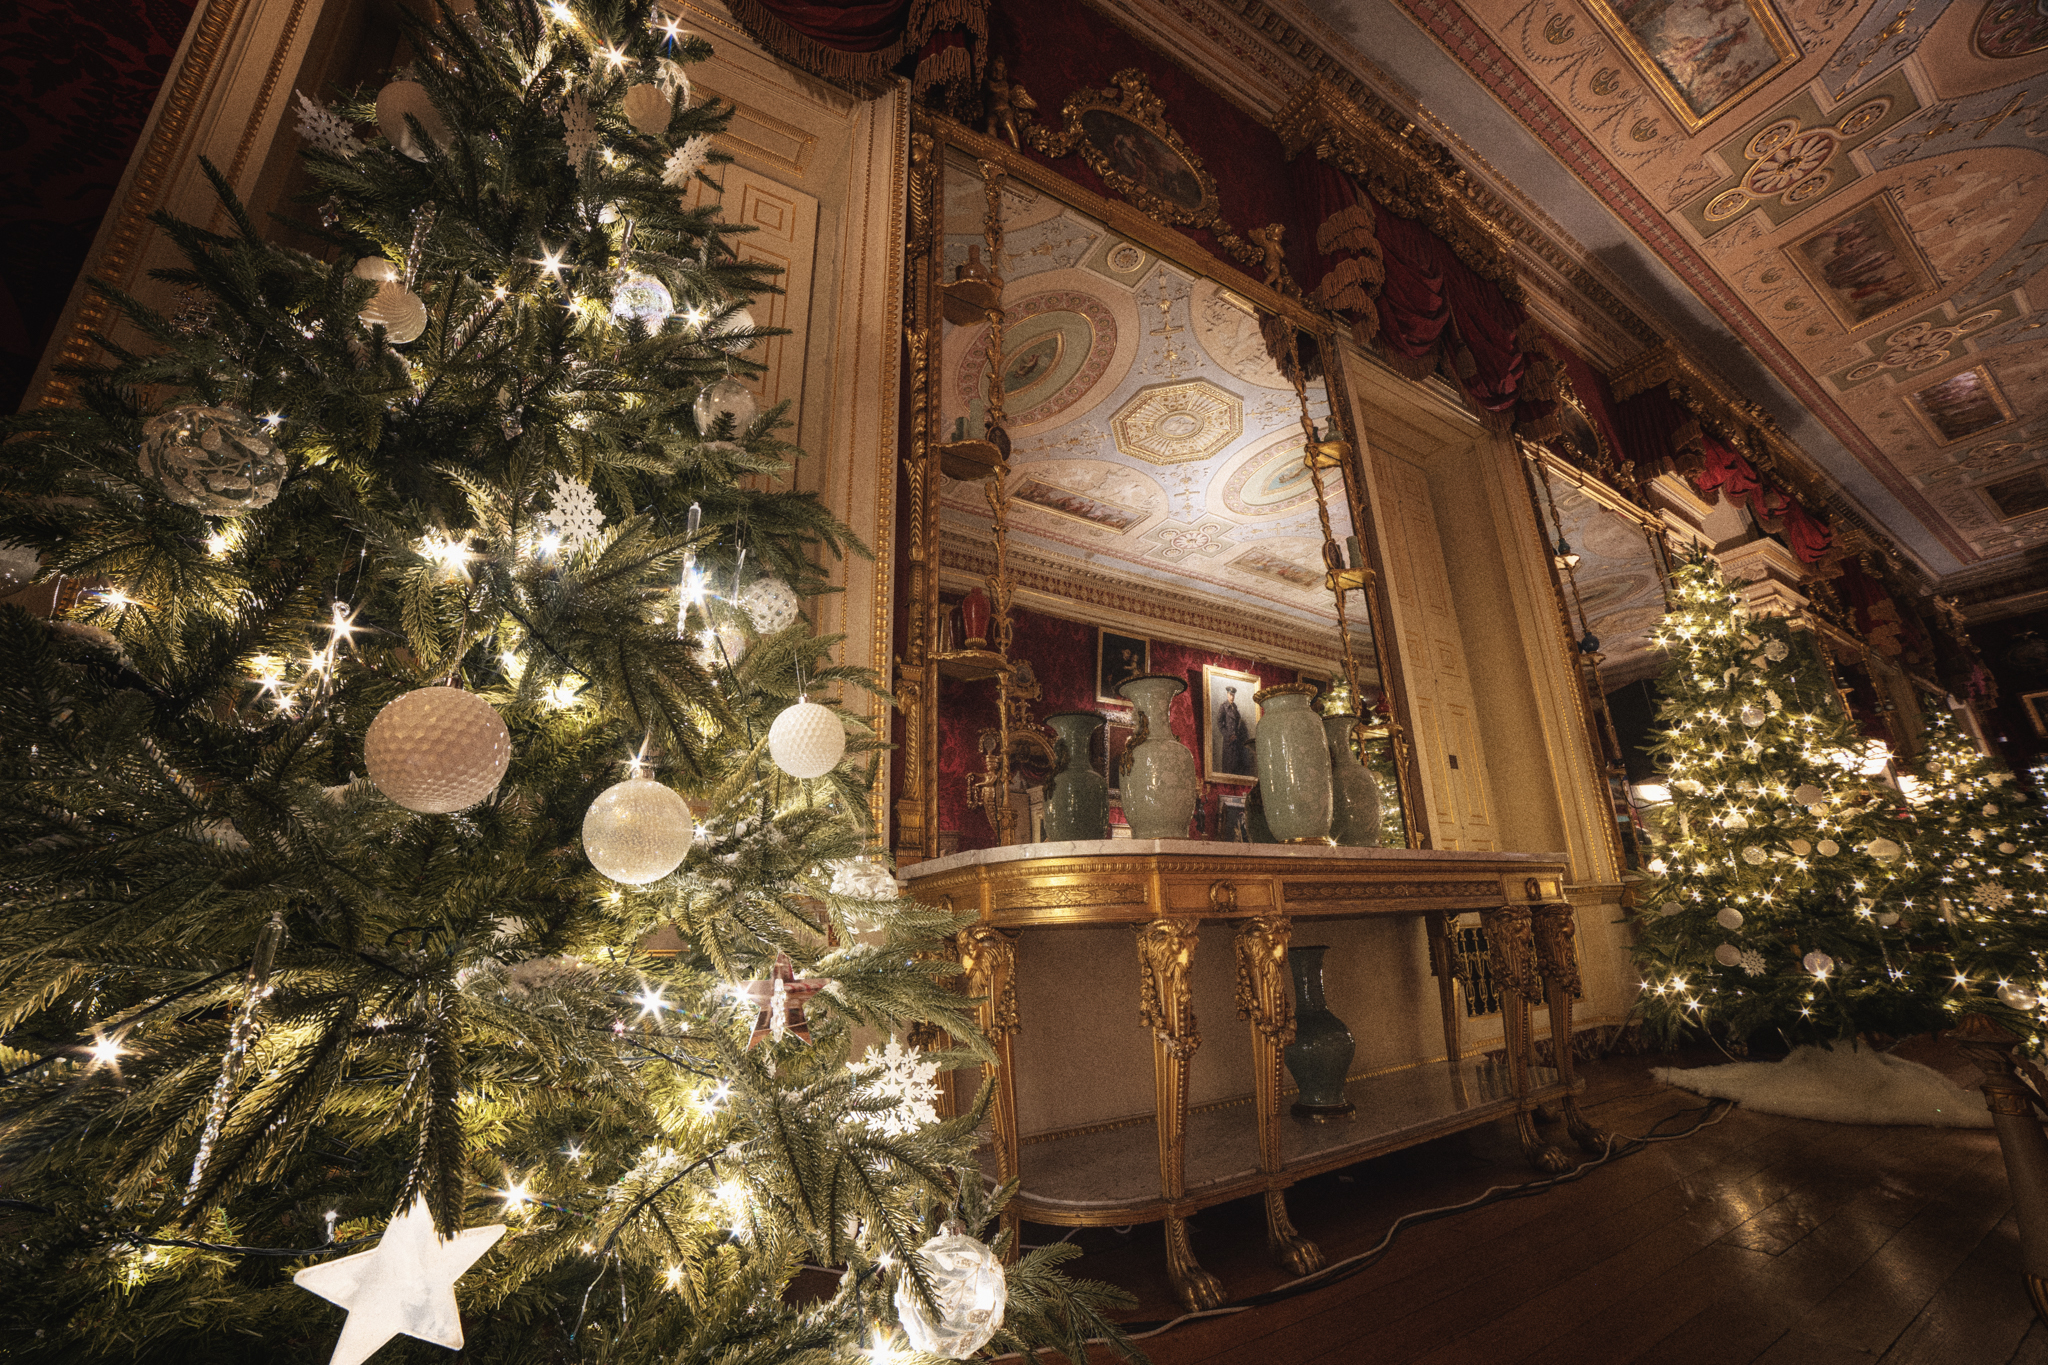 Long Live the Christmas Tree exhibition opens at Harewood House